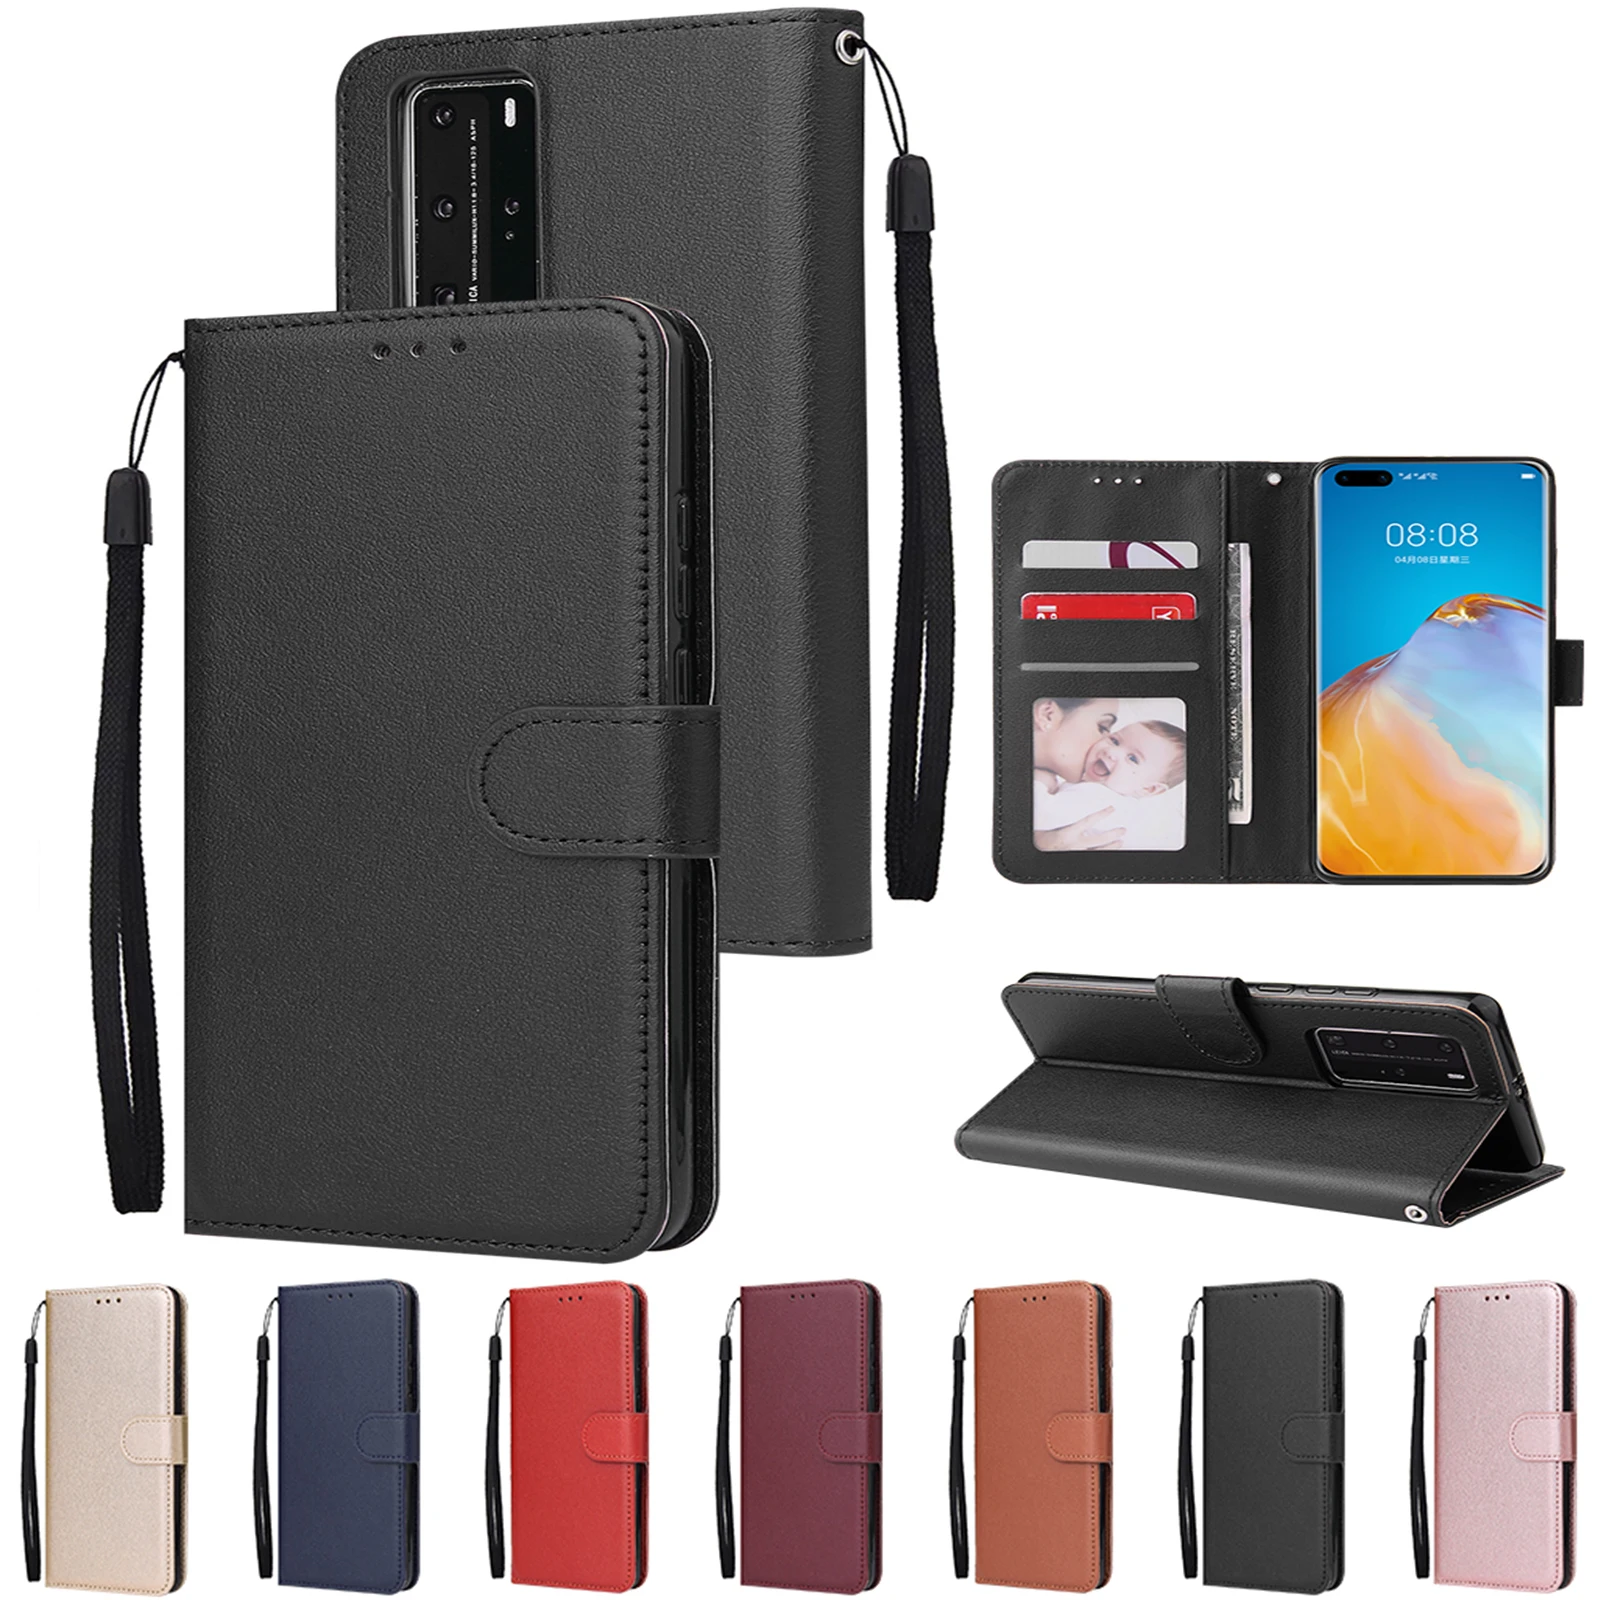 

PU Leather Case for Huawei Honor 10 9 20 Lite Pro 9A 9C 9S 8A 8X 8S 7A 7S 7C 6A 7S 10i 9i 20i Flip Wallet Case Housing Funda